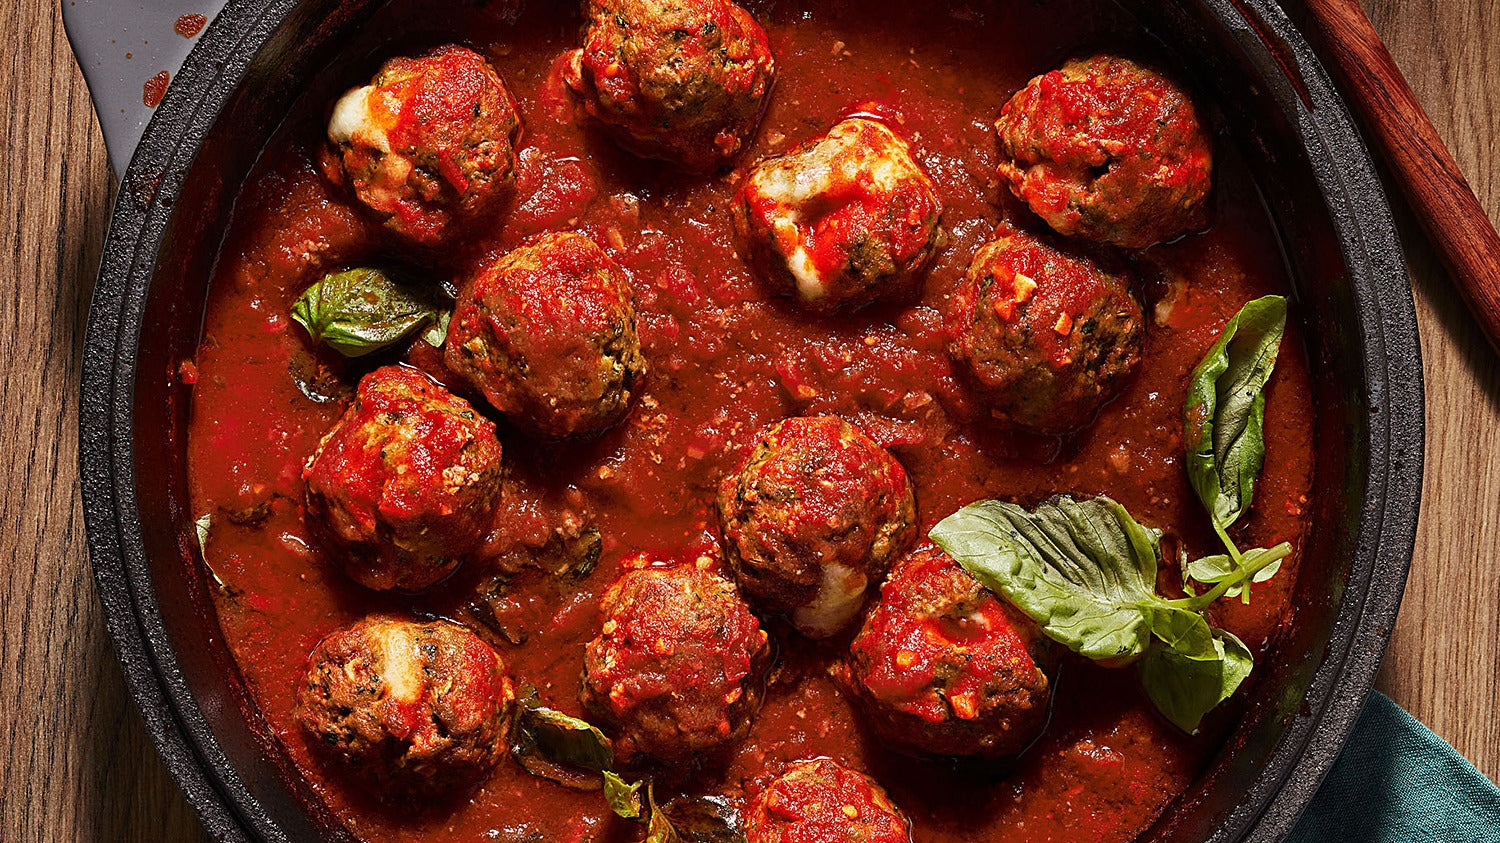 Rachael Ray's Provolone-Stuffed Meatballs with Kale